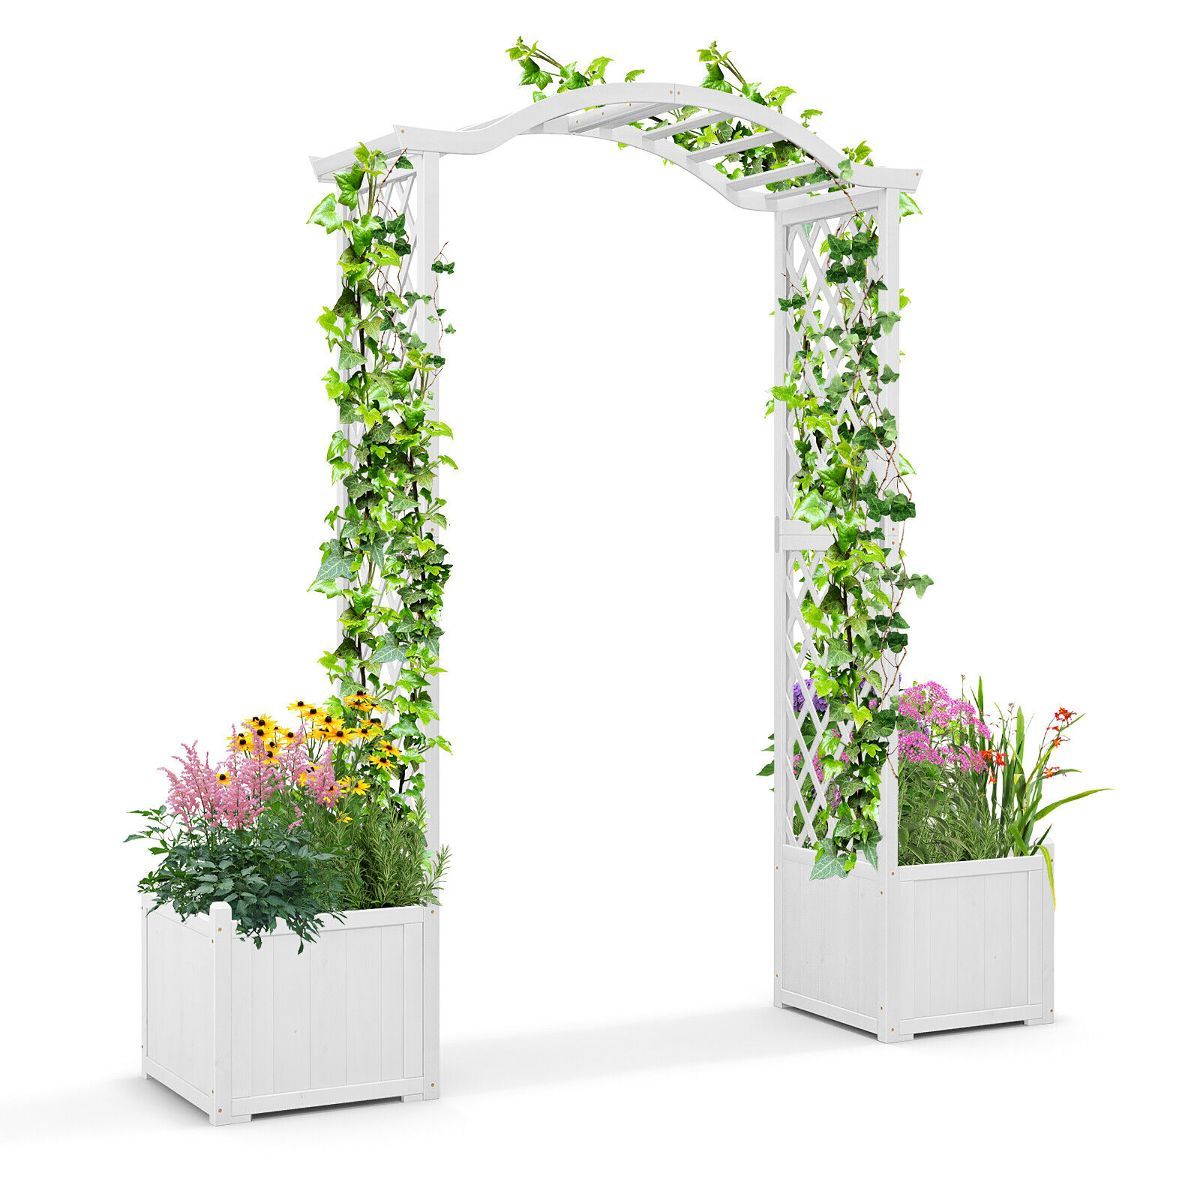 Tangkula Garden Arbor with Planter Wooden Planter Arch with Trellis | Target